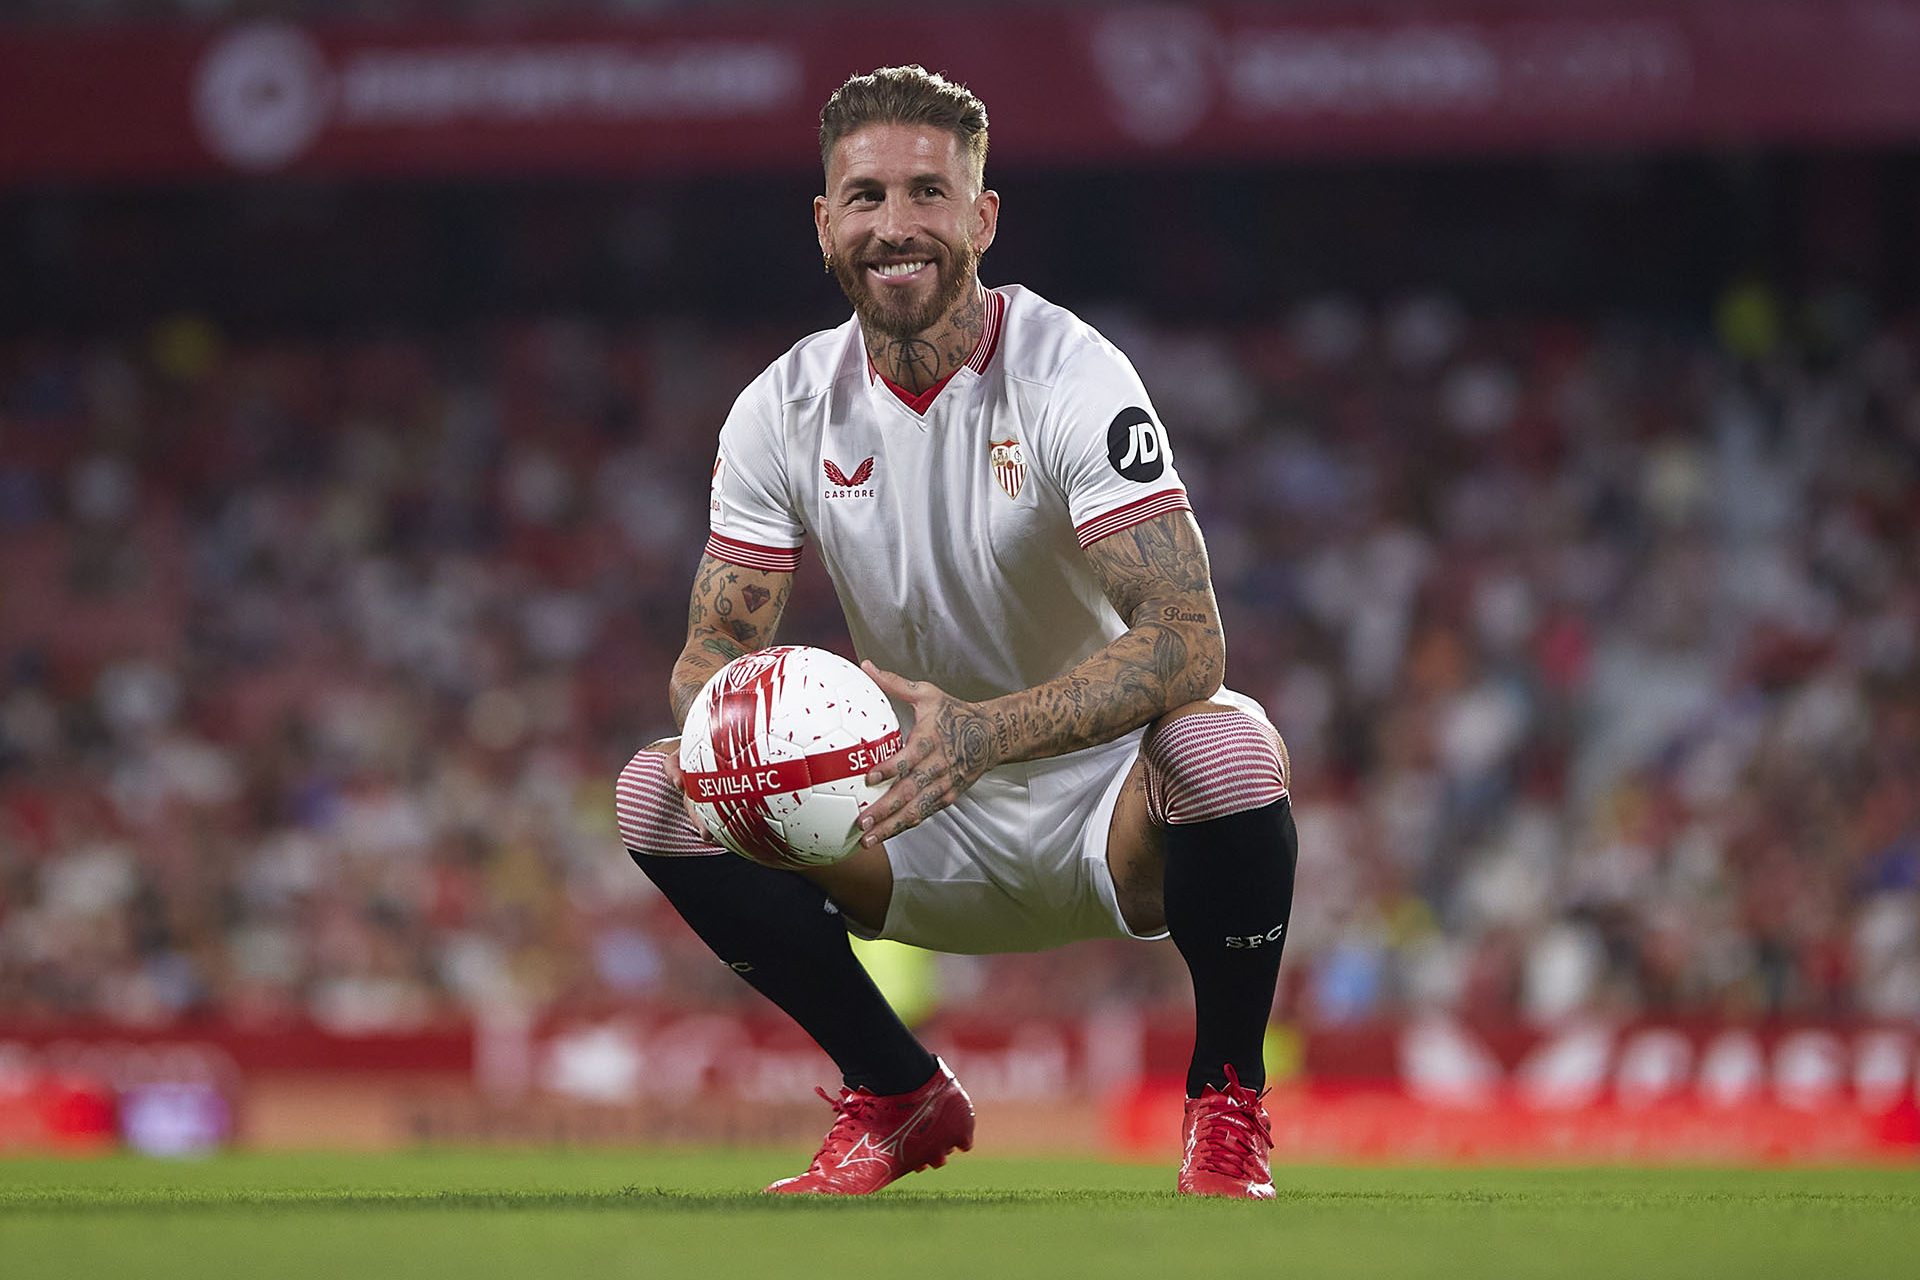 A good signing for the Sevilla economy